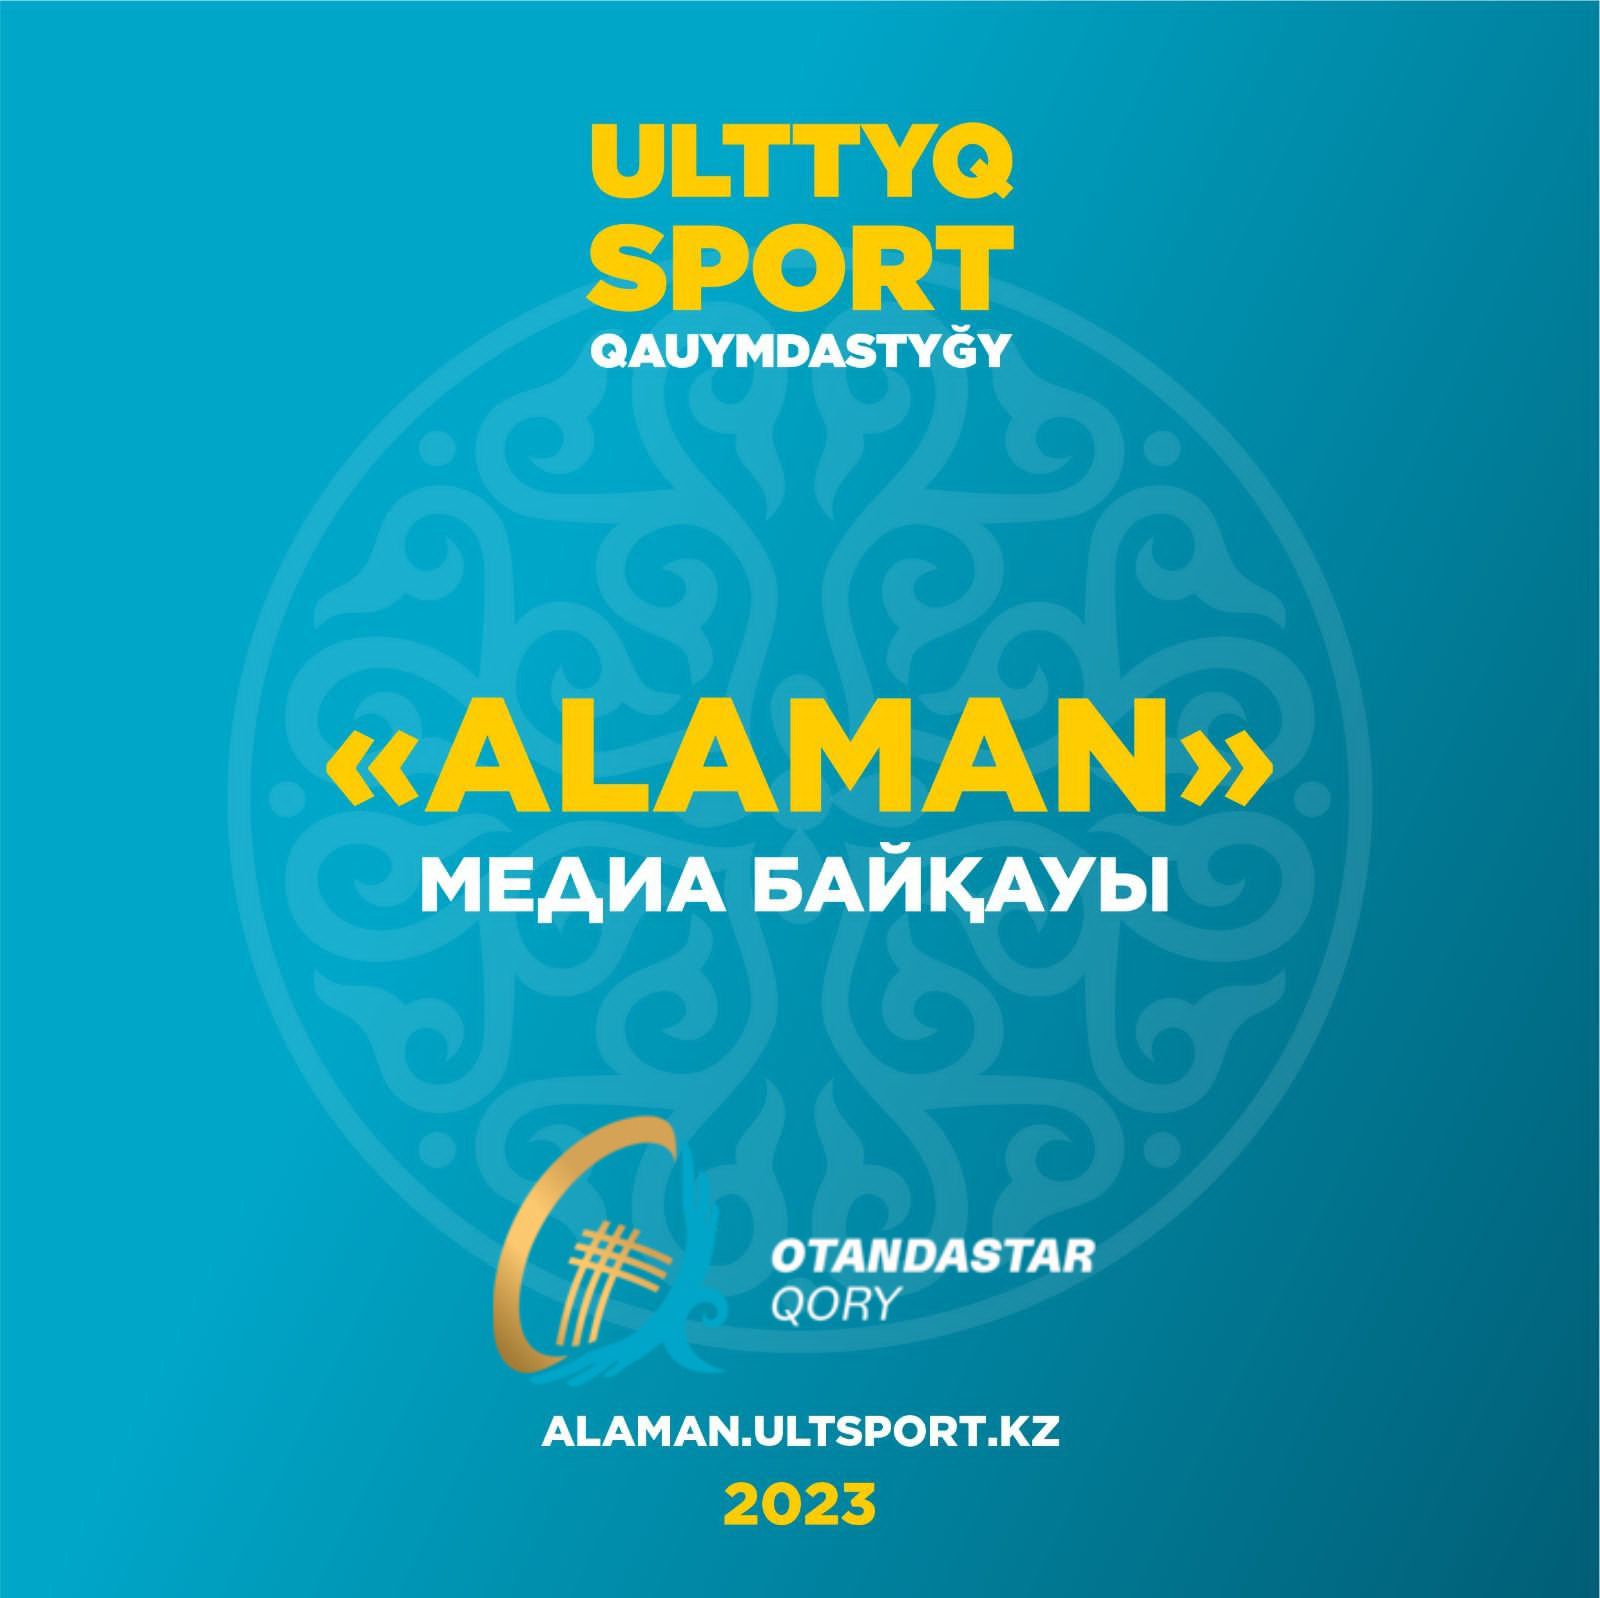 Representatives of foreign Kazakh-language media can also participate in the media contest "ALAMAN" upon the suggestion of the Otandastar Qory